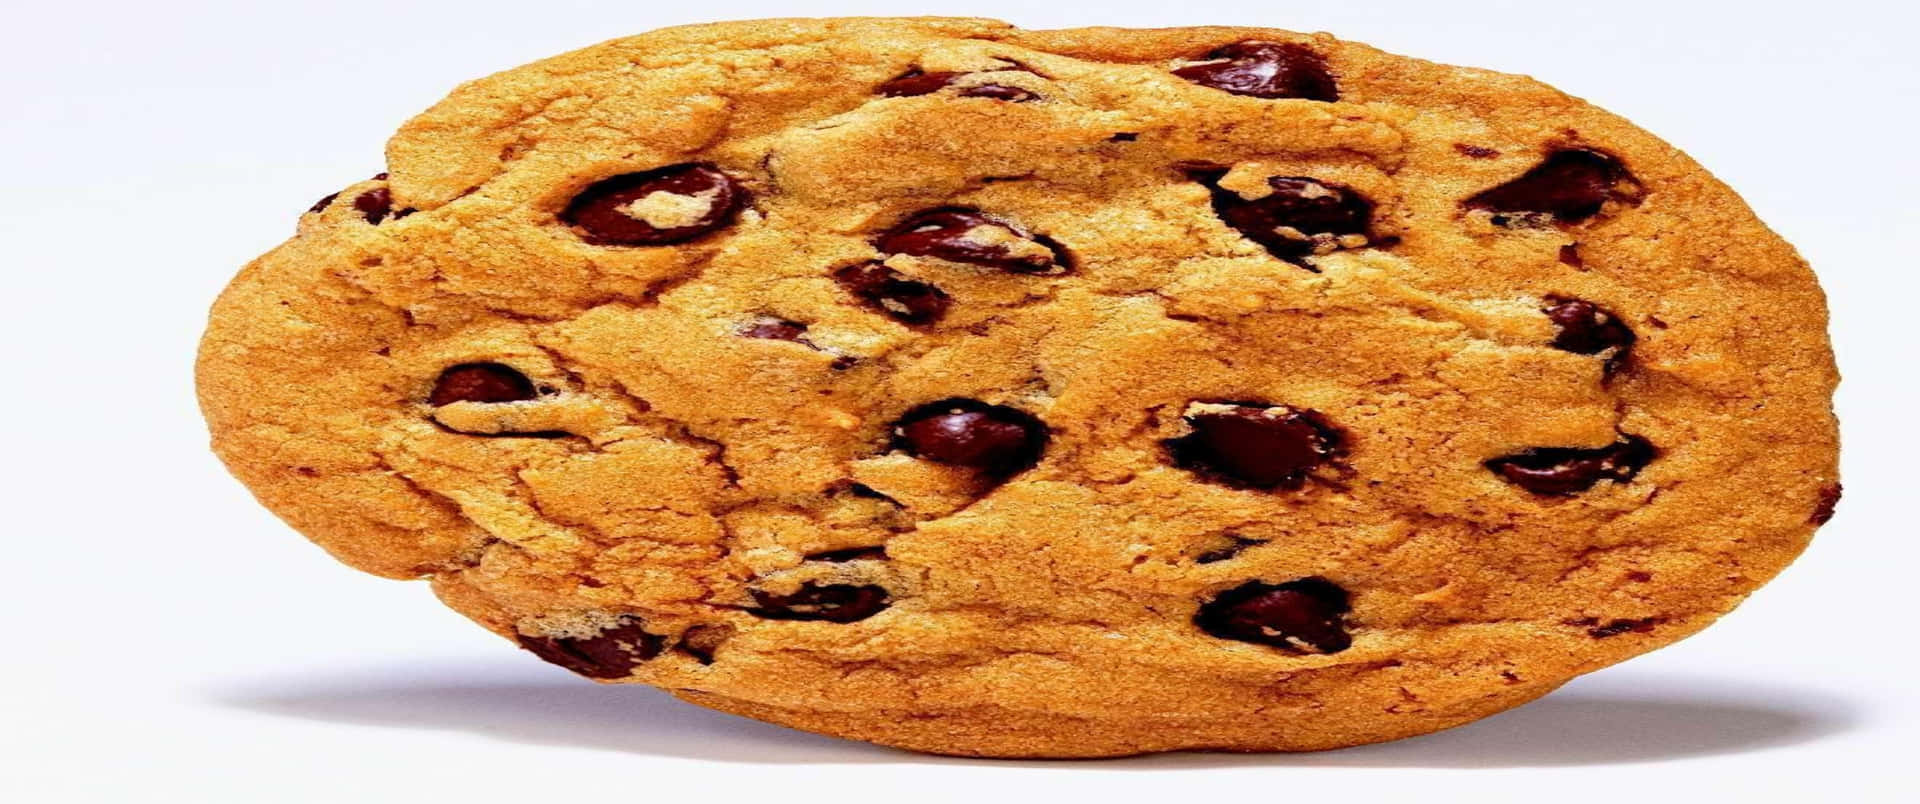 Sweet Chocolate Chips 3440x1440p Cookies Background